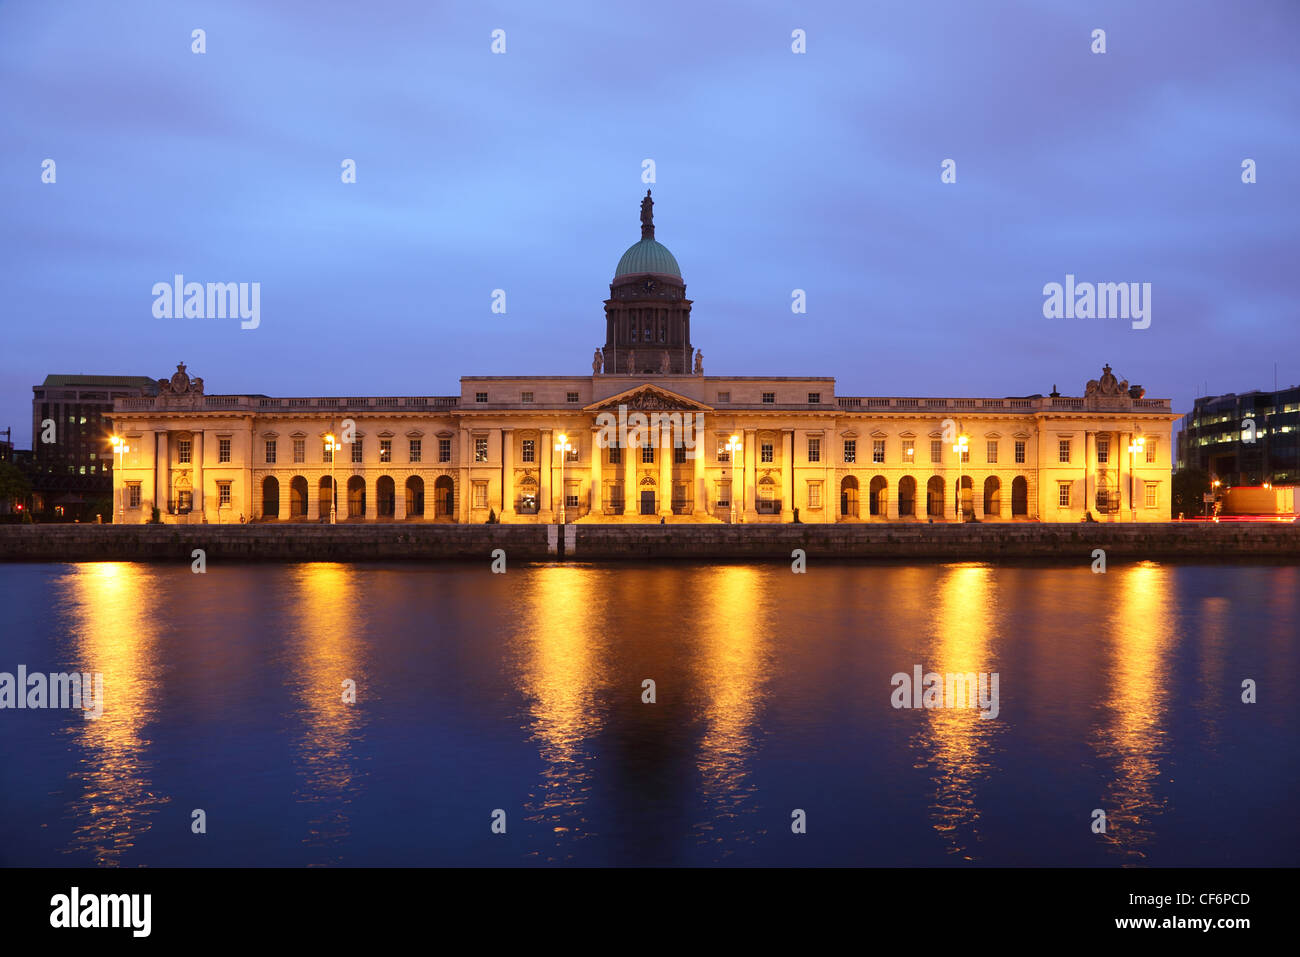 The southern facade of the Customs House at night in Dublin. Stock Photo